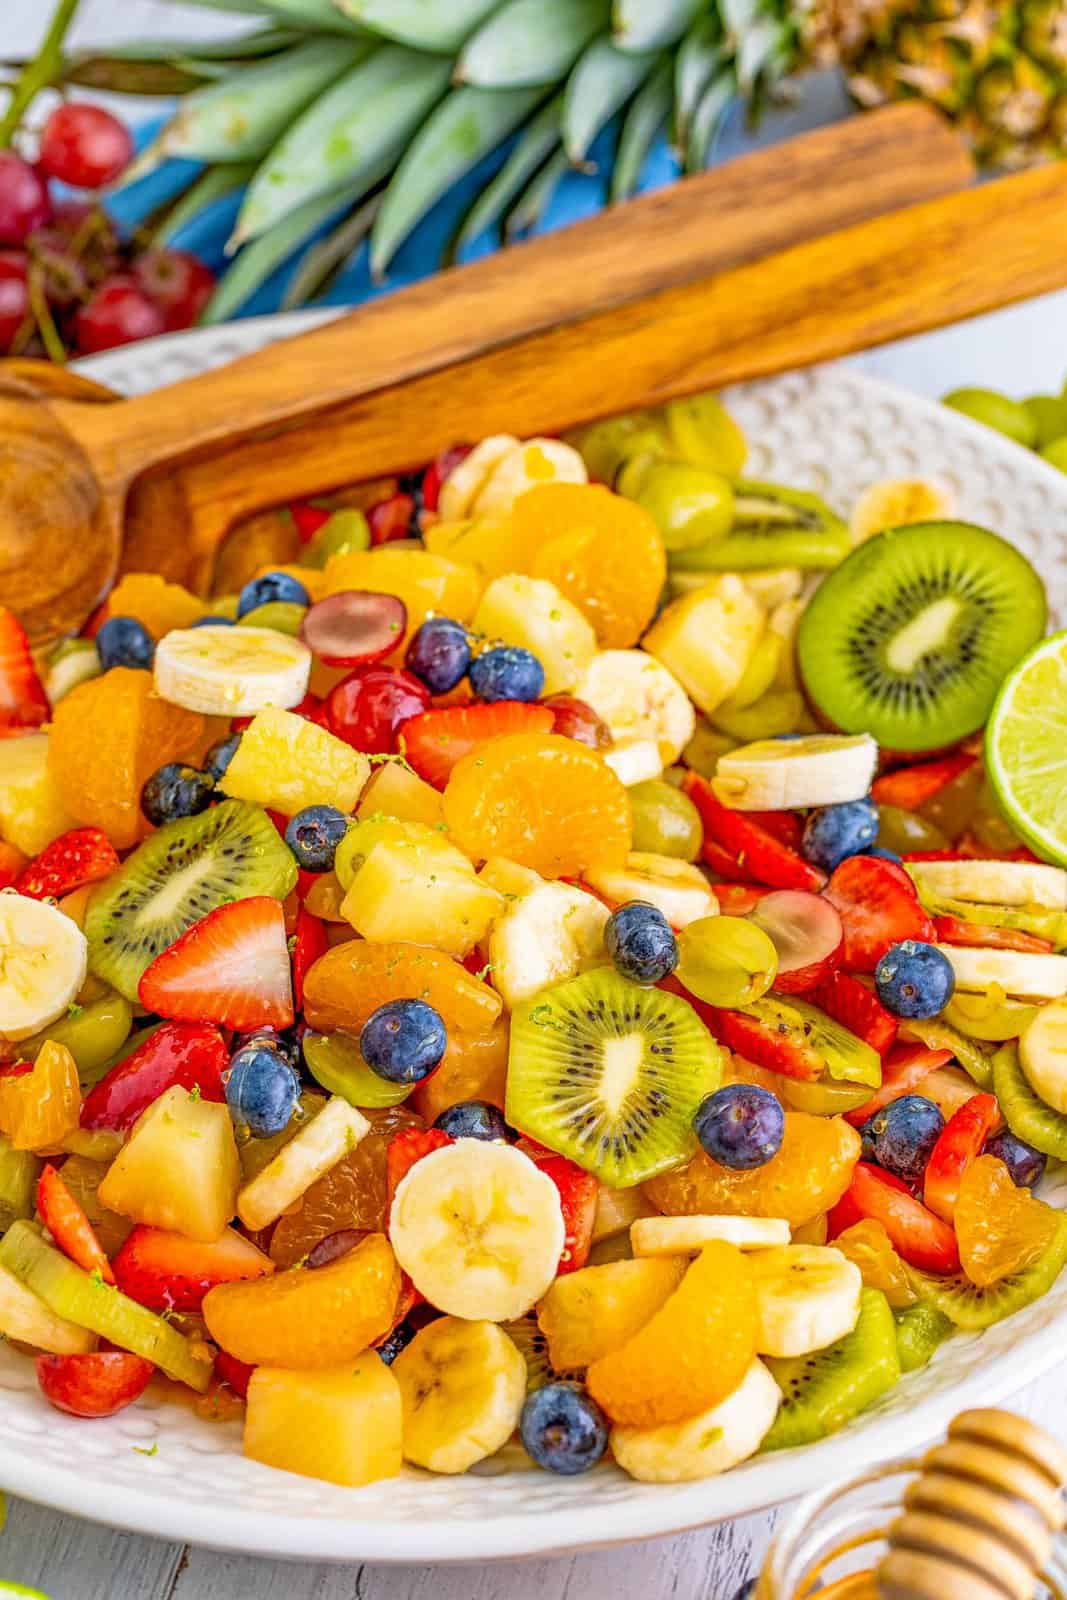 Fruit Salad Recipe in large serving bowl with wooden spoons.